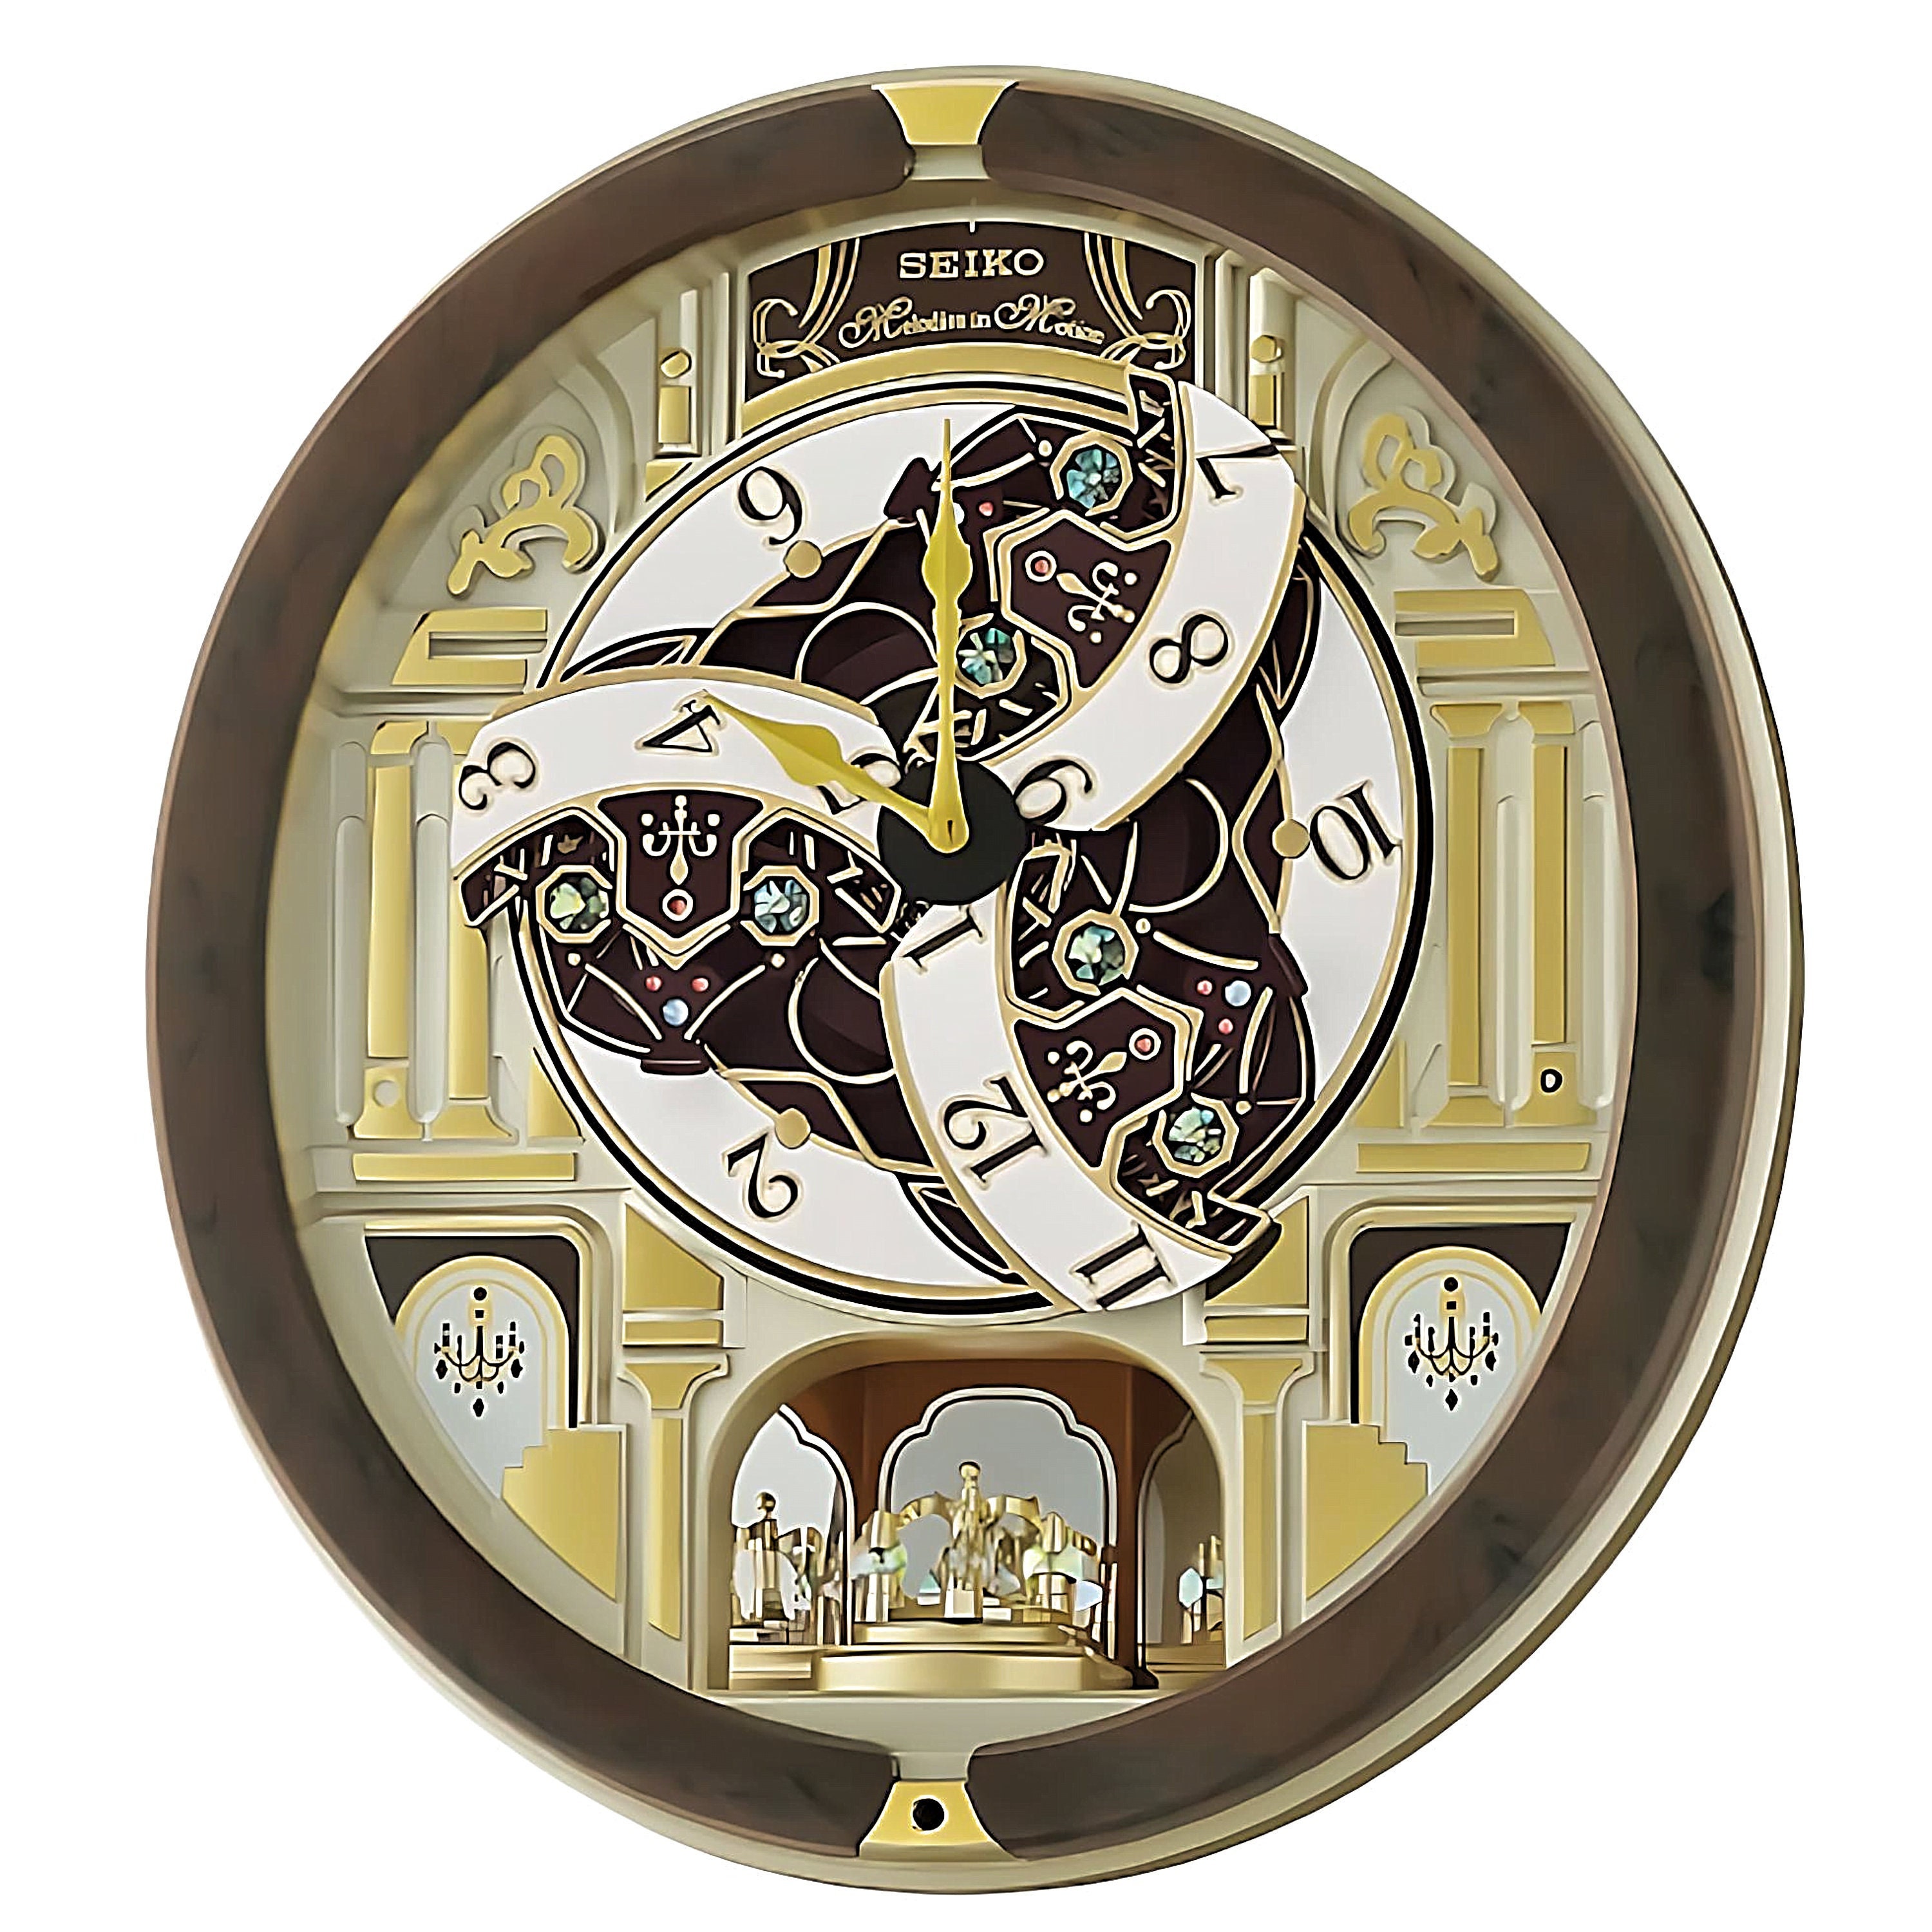 Seiko Melodies in Motion Wall Clock - Etsy